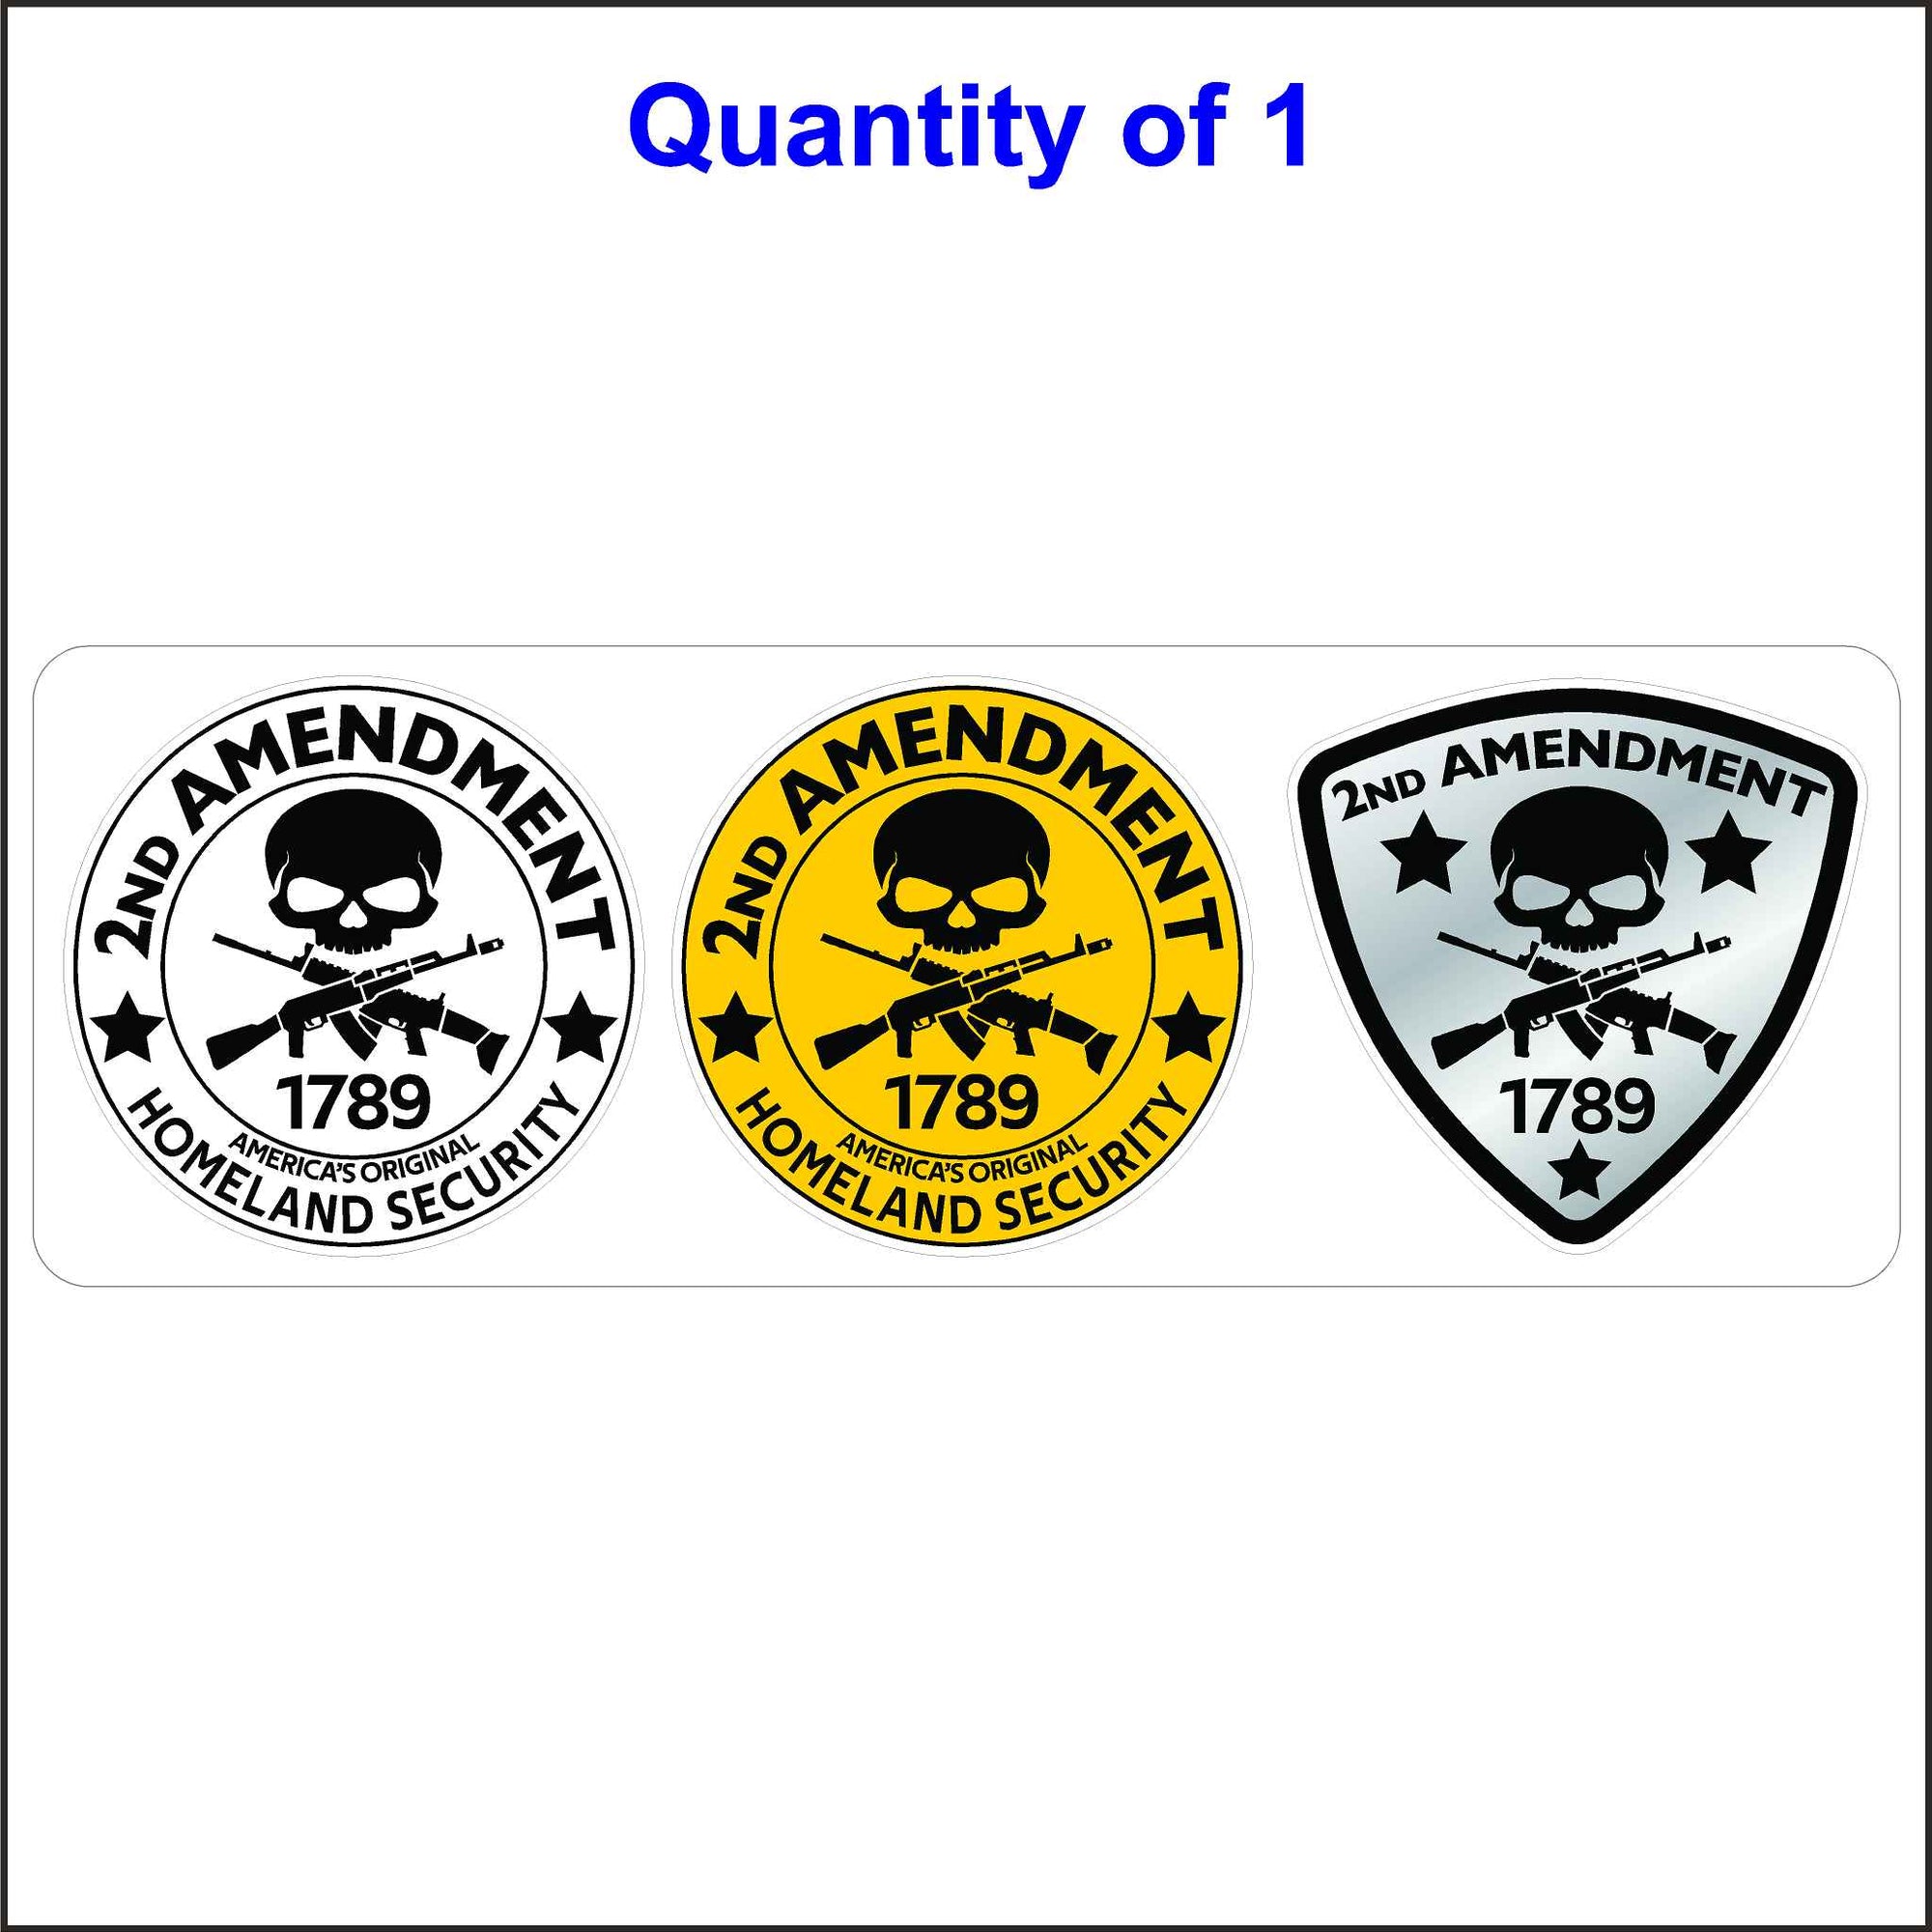 Second Amendment Sticker With Skulls 3 Pack. 3 Different 2nd Amendment Stickers One of Each in White, Yellow and Gray All With Black Letters.